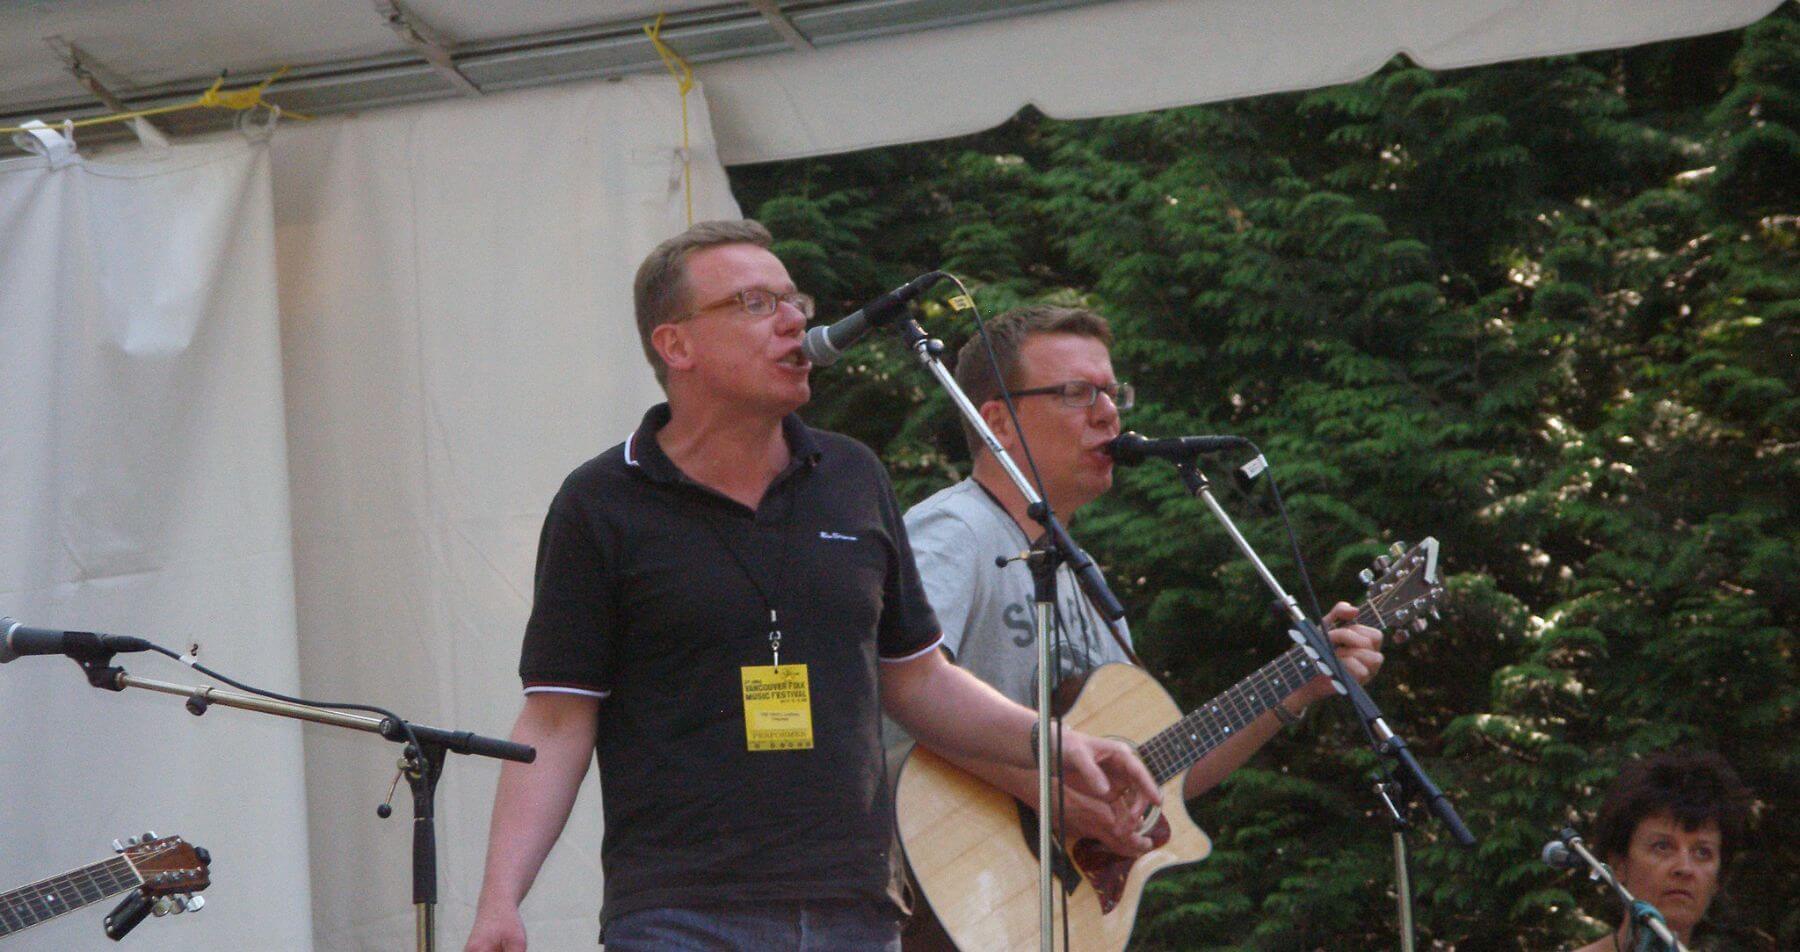 The Proclaimers, singing